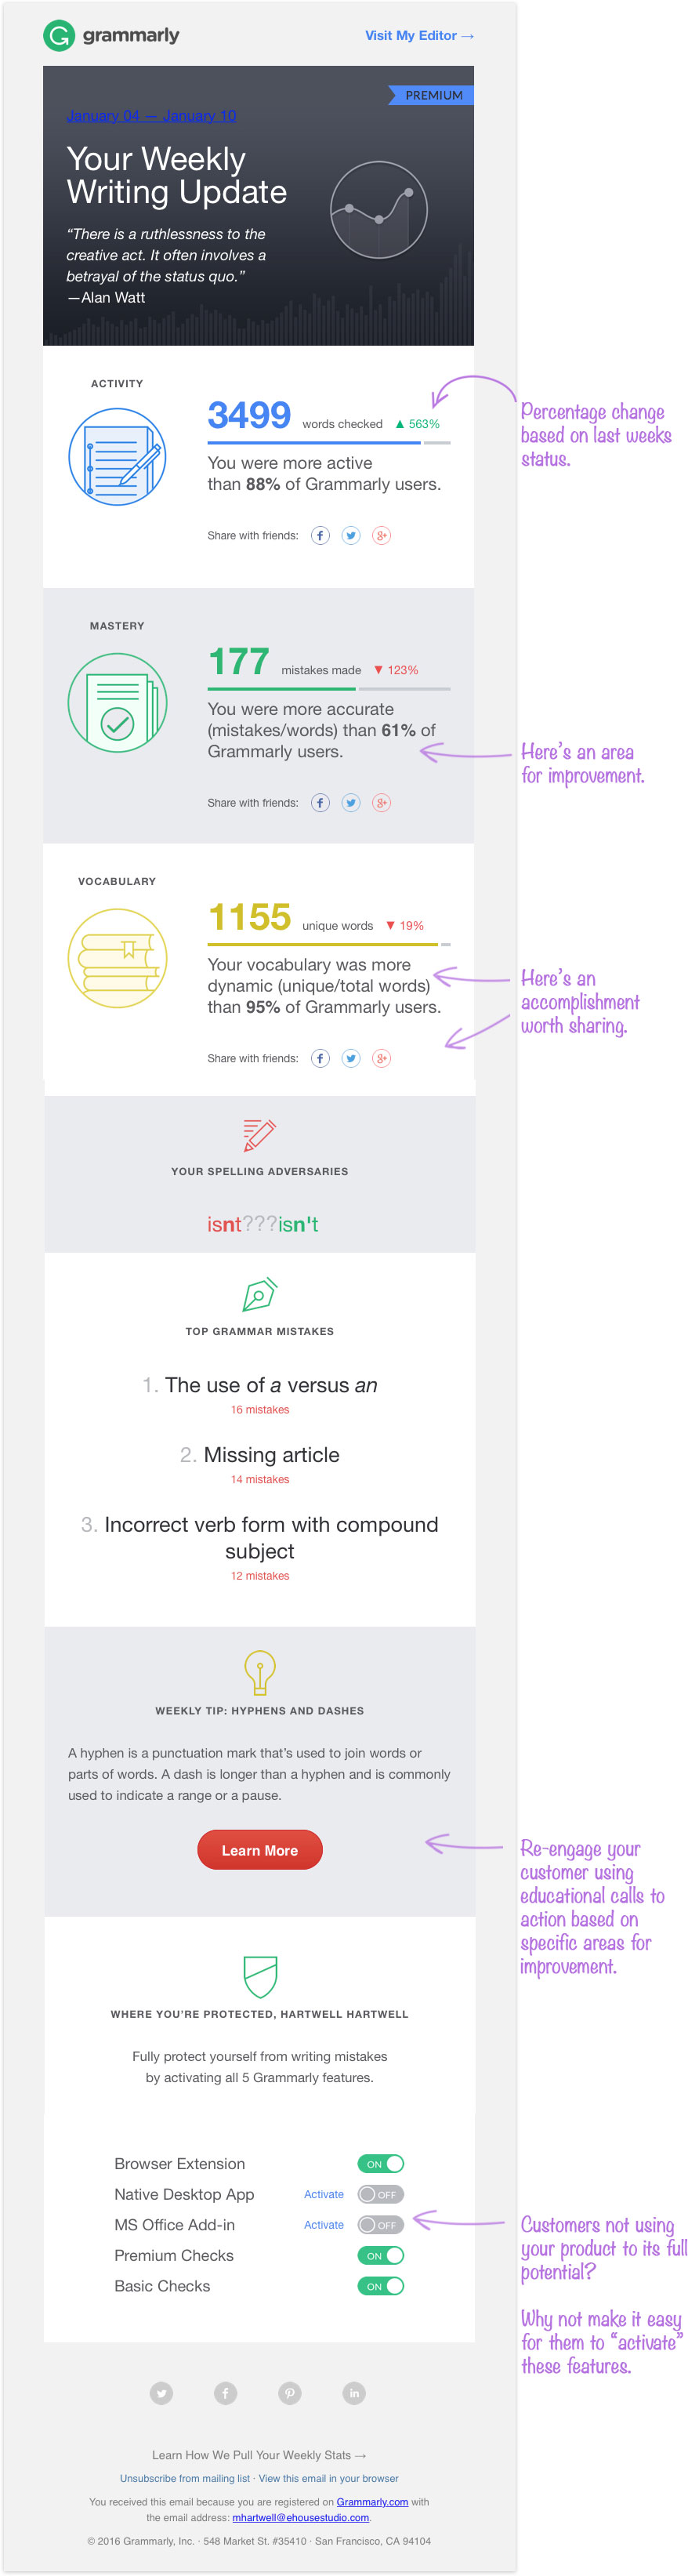 Grammarly Transactional Email